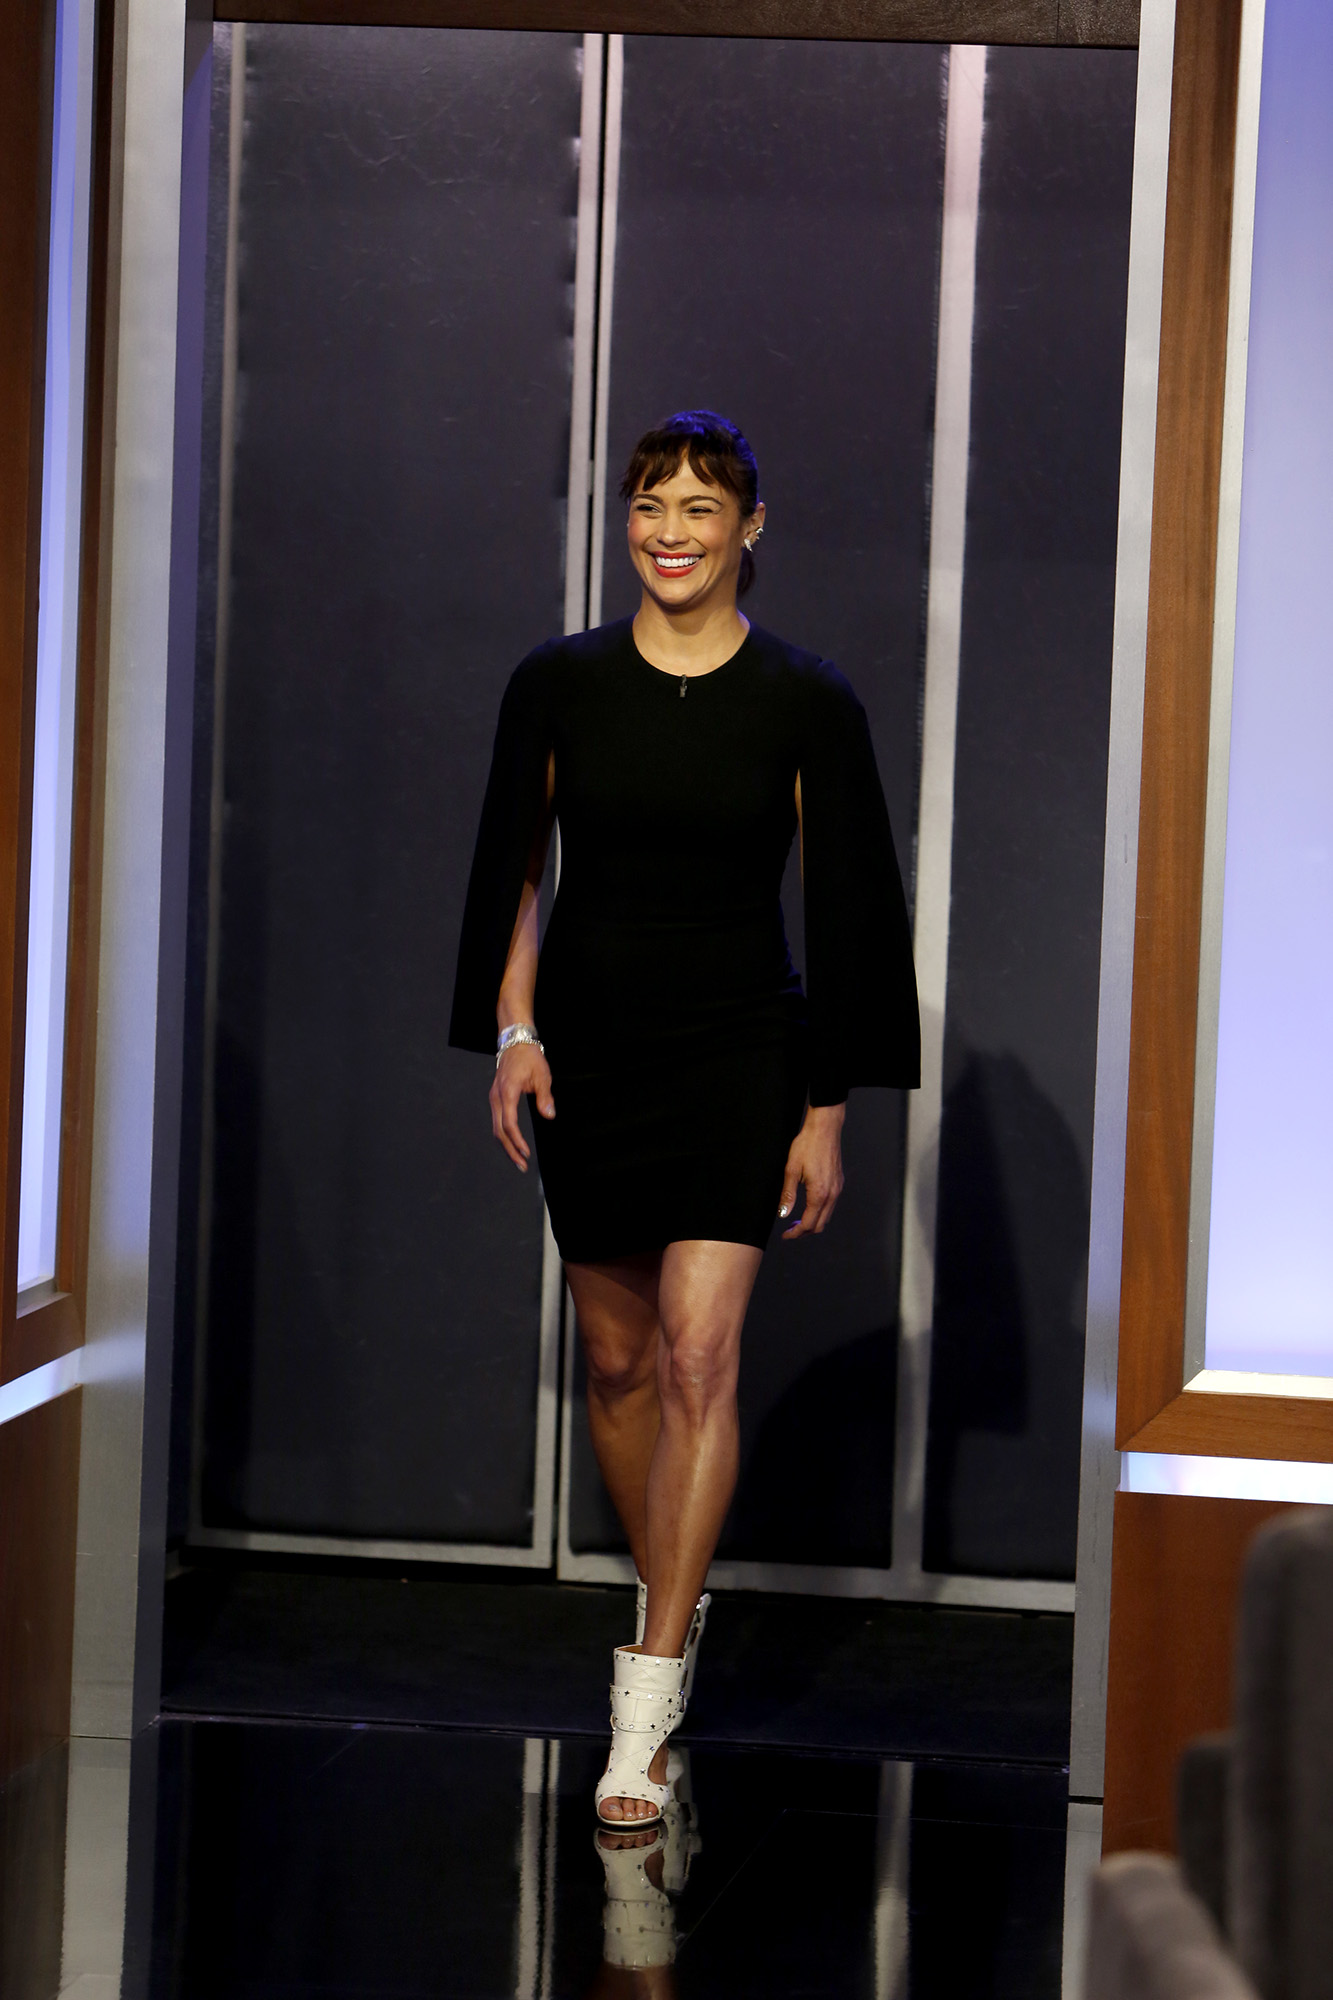 In Case You Missed It: Paula Patton On Jimmy Kimmel Live!